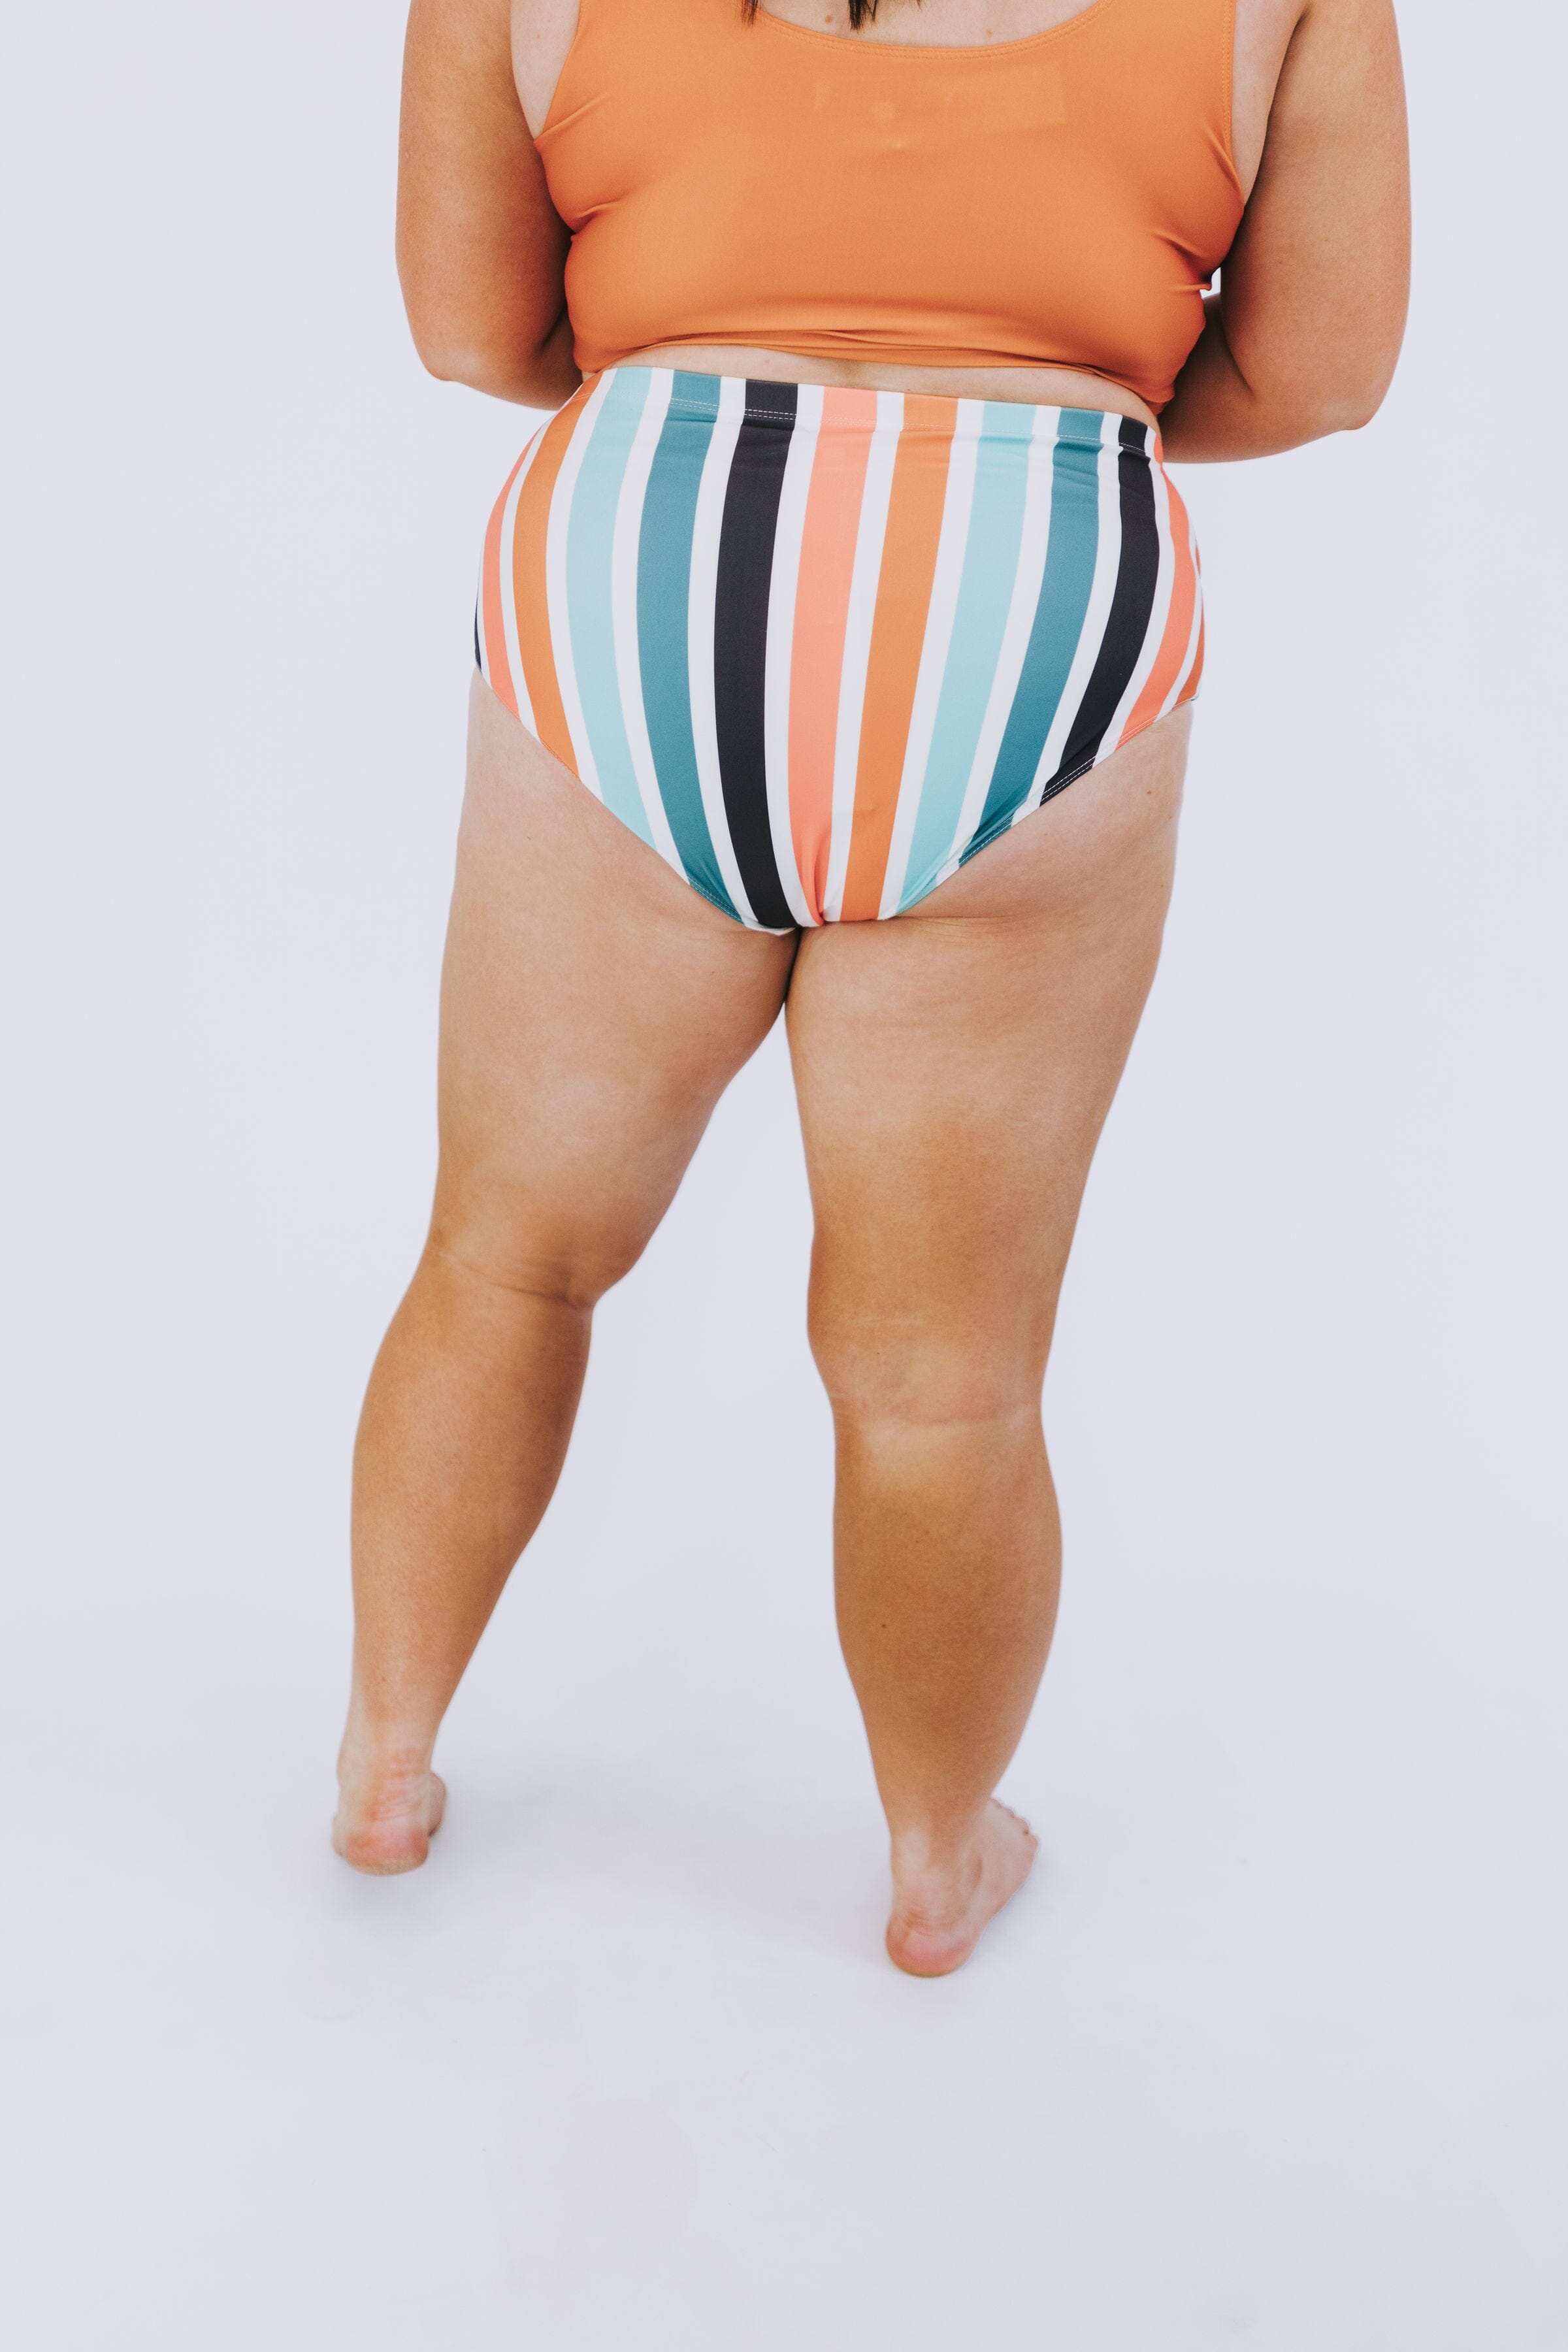 ONE LOVED BABE - Copa Cabana Bottoms - 4 Colors